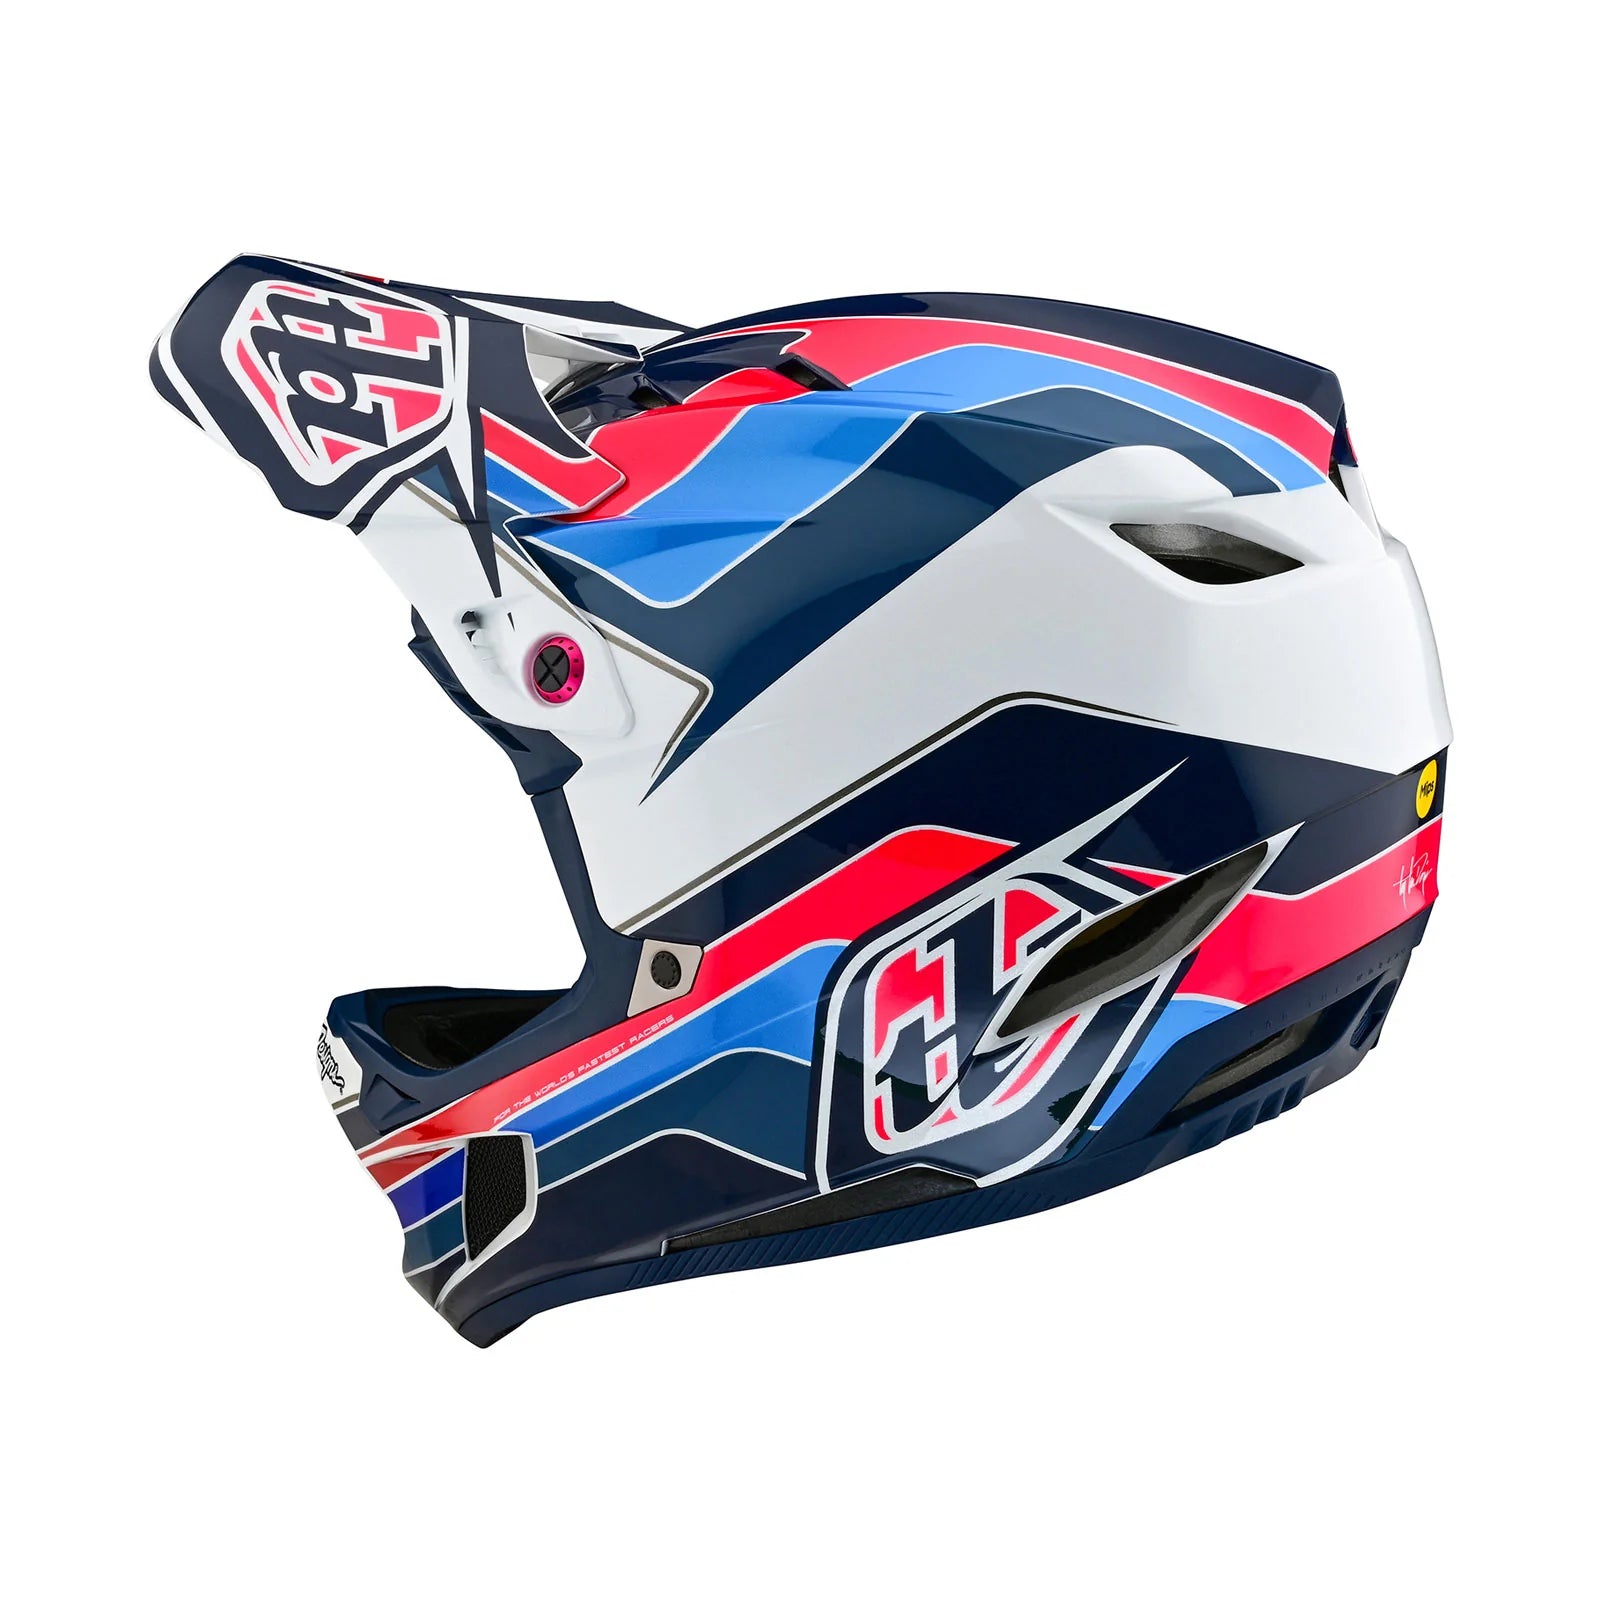 A safety helmet with a red, blue, and white TLD D4 AS Polyacrylite Helmet W/MIPS Block Blue / White.